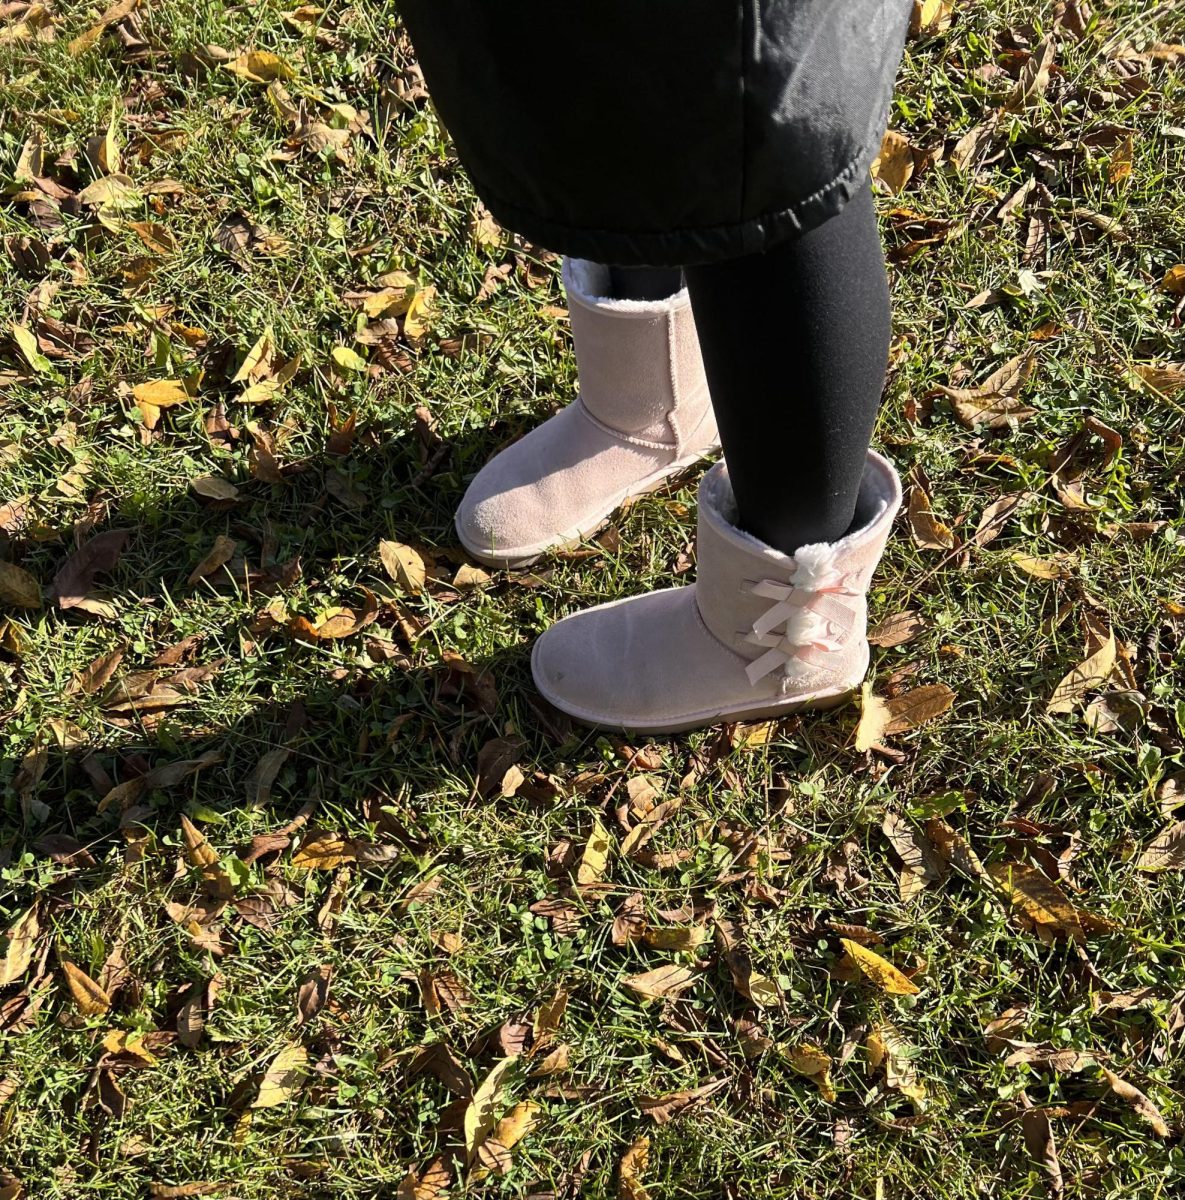 I photo I forced my friend to take of my pink UGG boots